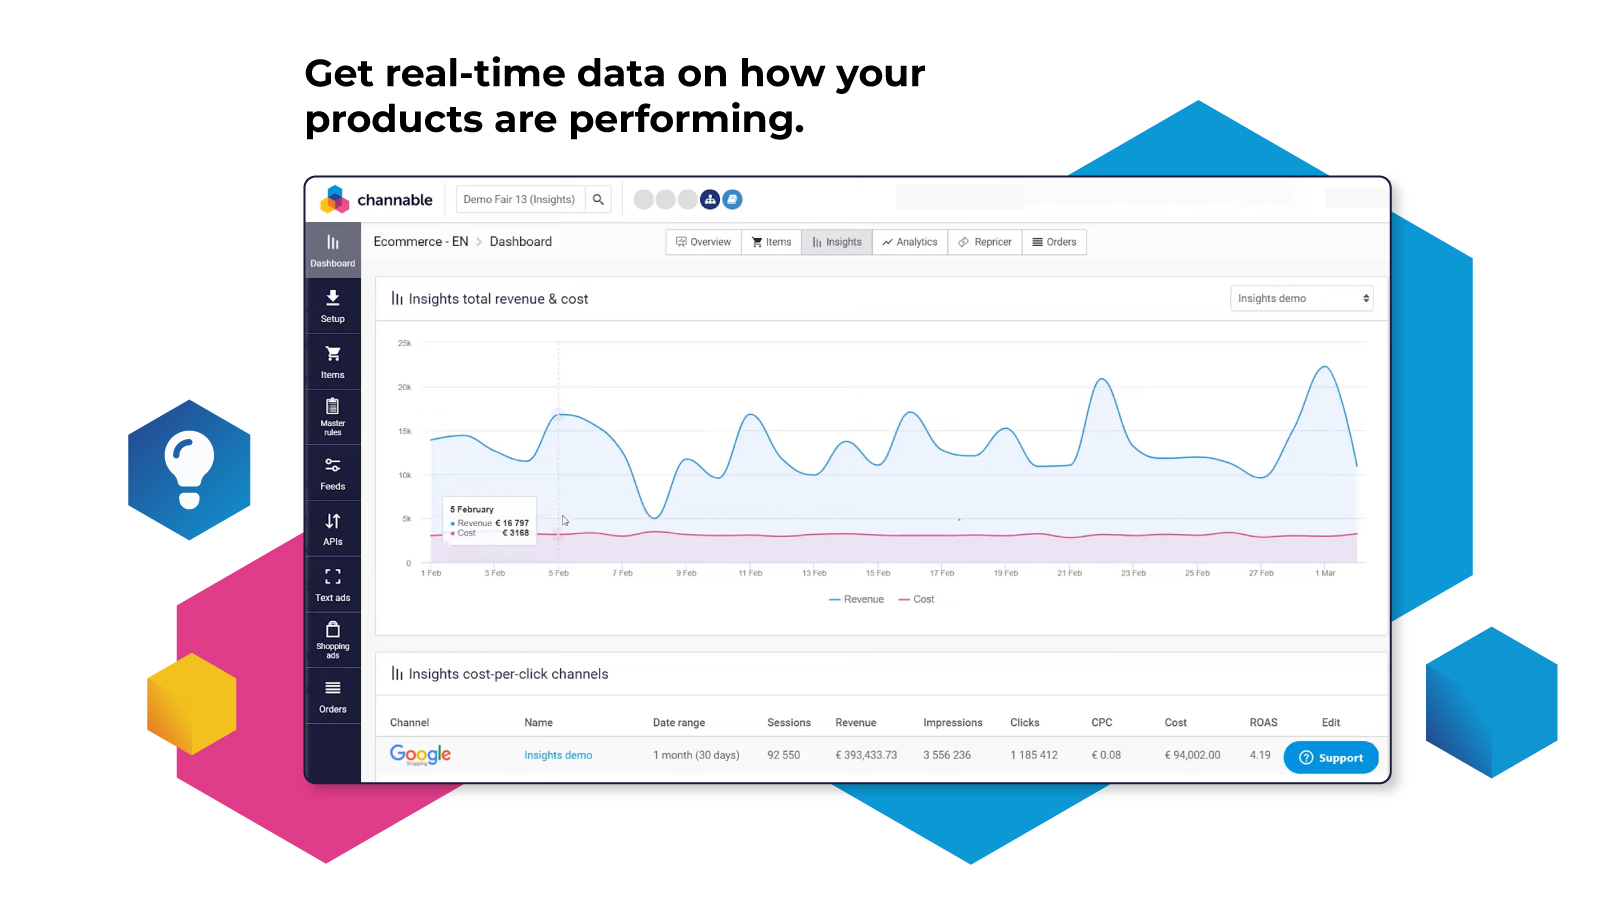 Get real-time data on how your products are performing